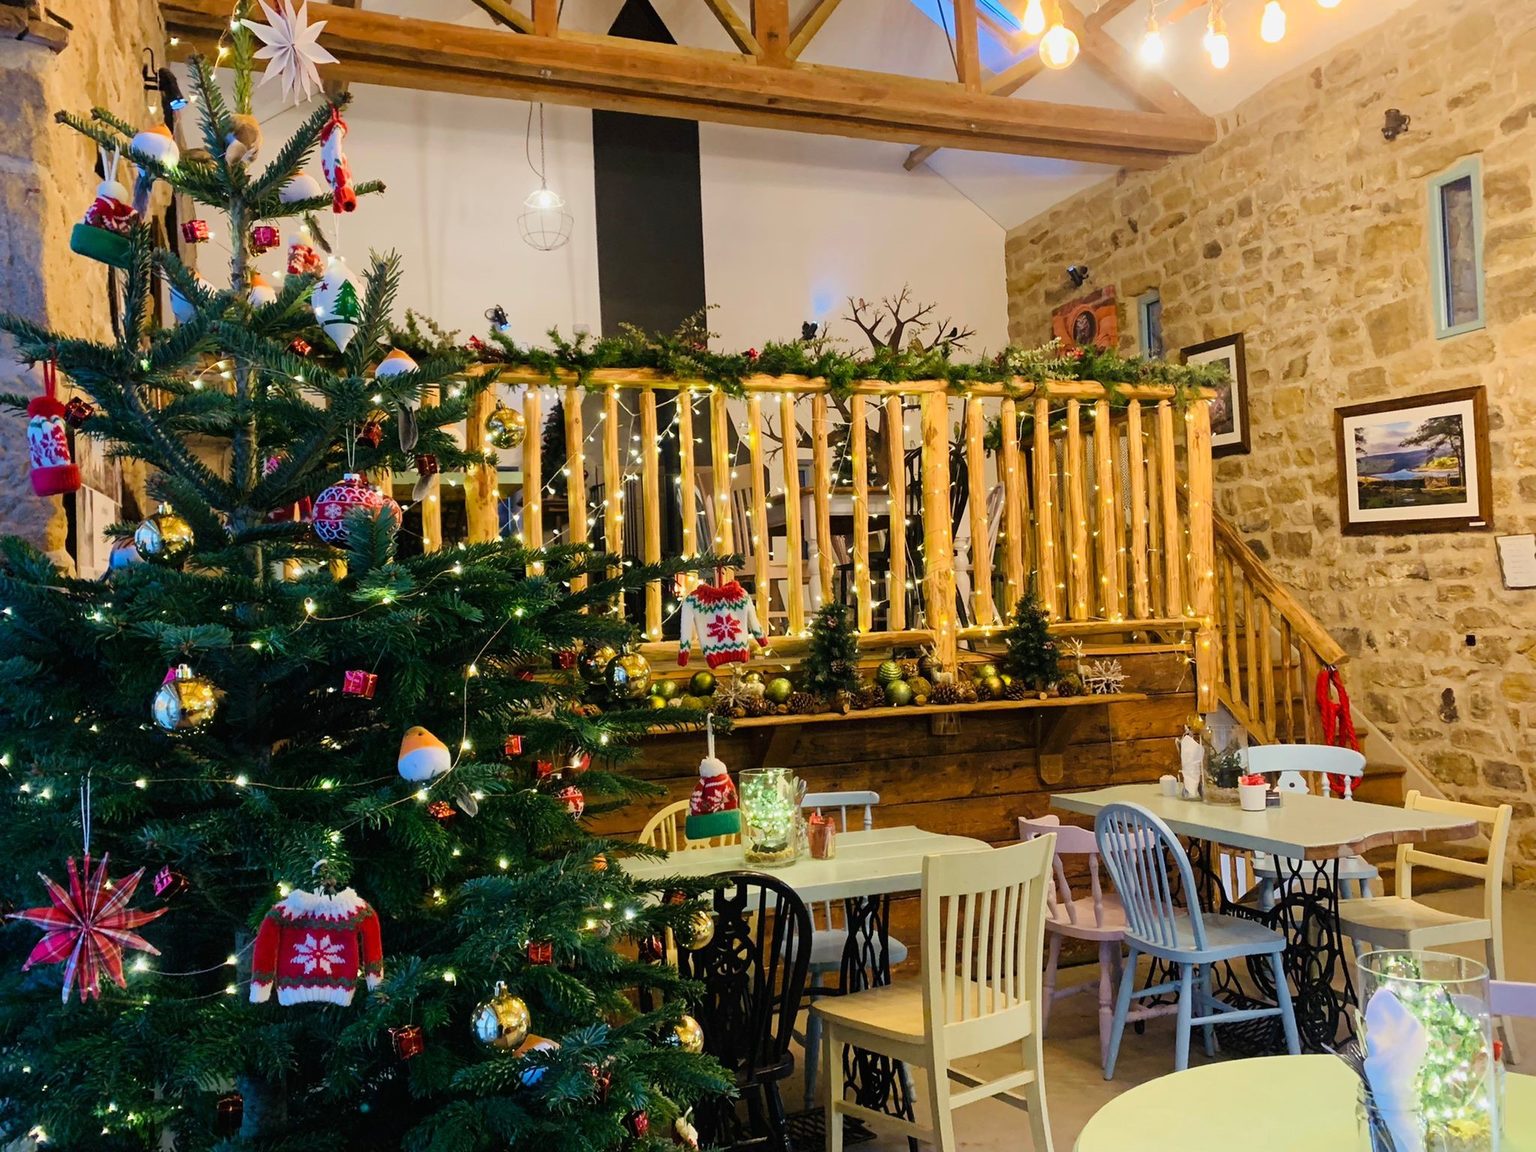 The Bivouac Cafe decorated for Christmas